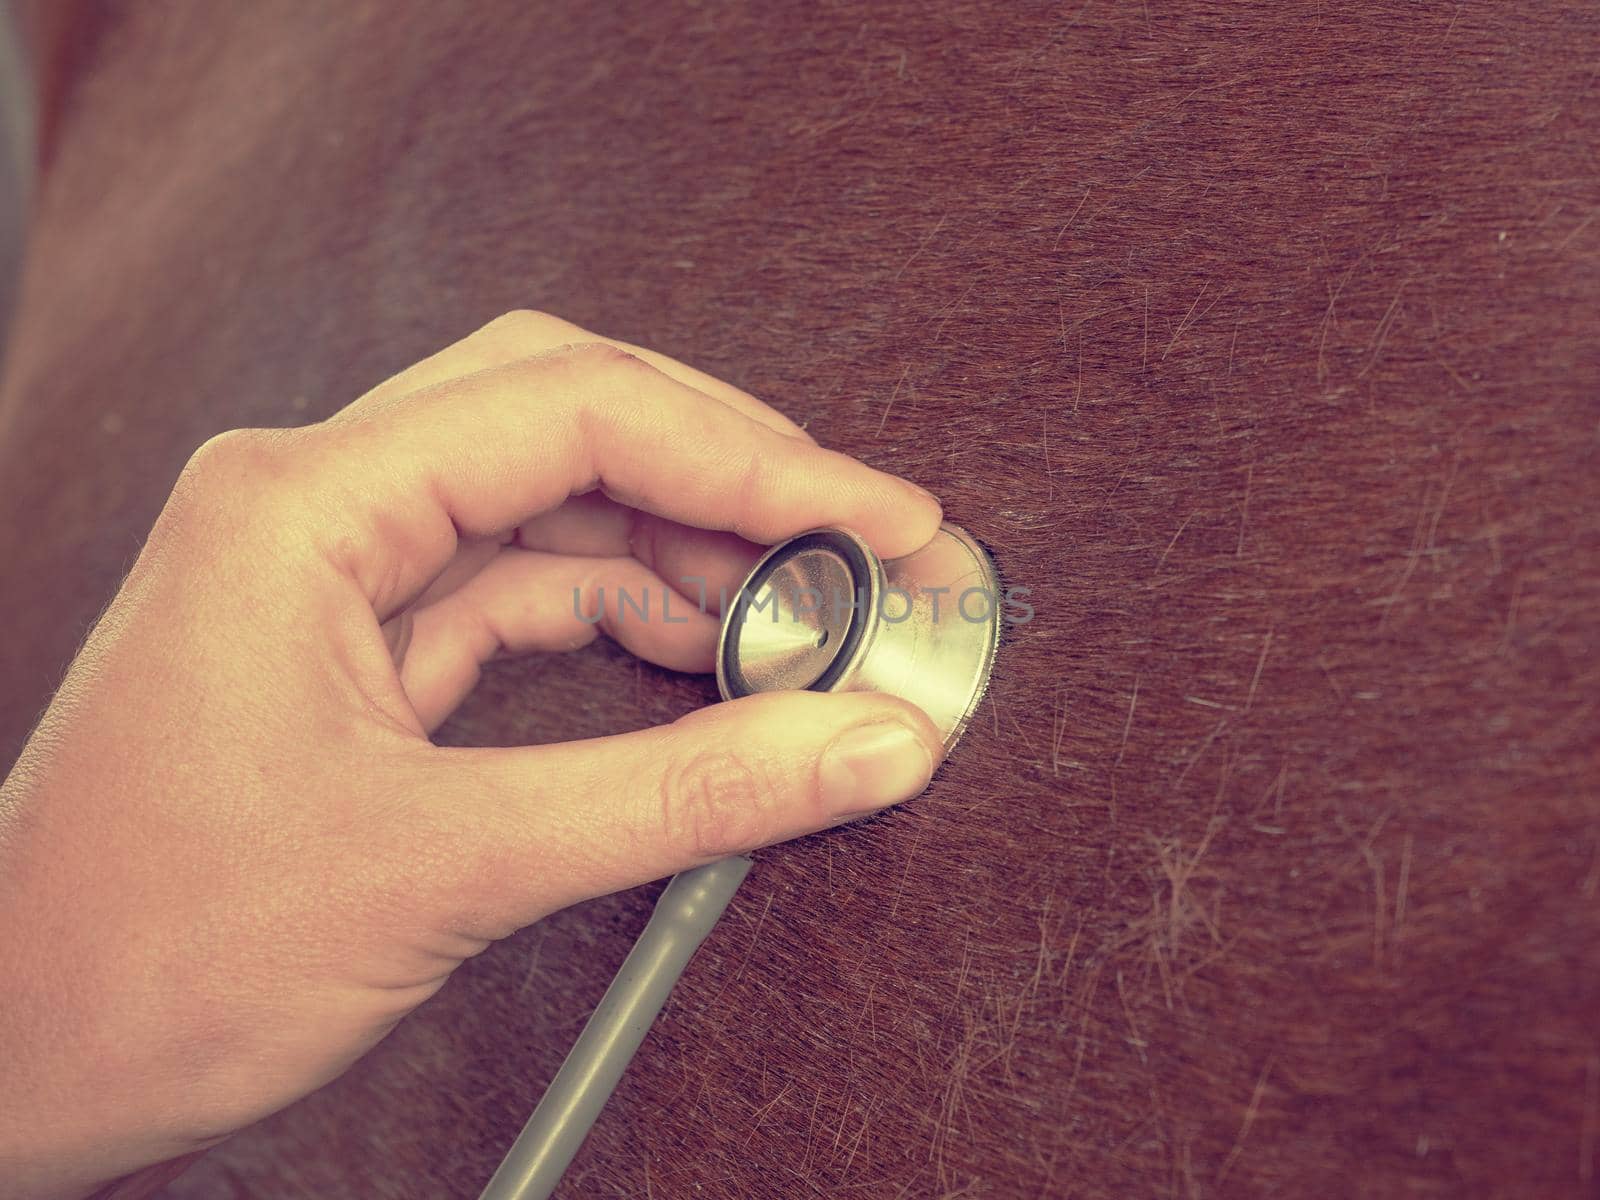 Veterinarian with stethoscope check lungs of horse by rdonar2